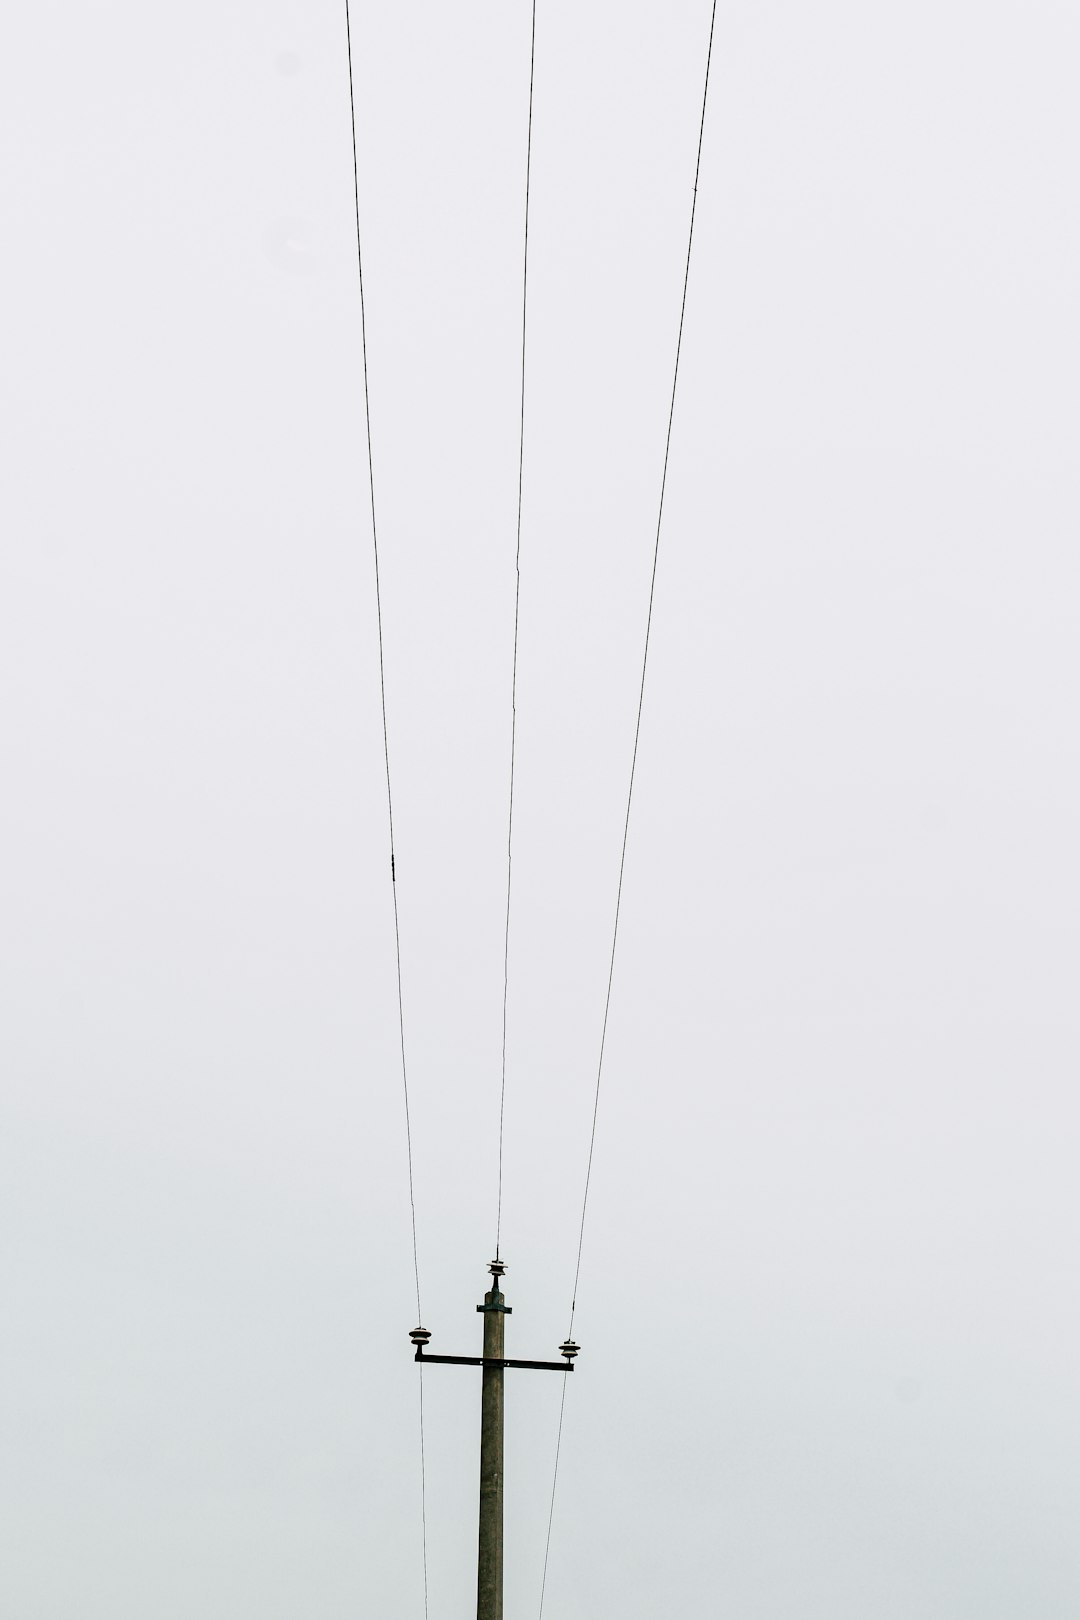 person in black jacket standing on black cable wire under white sky during daytime